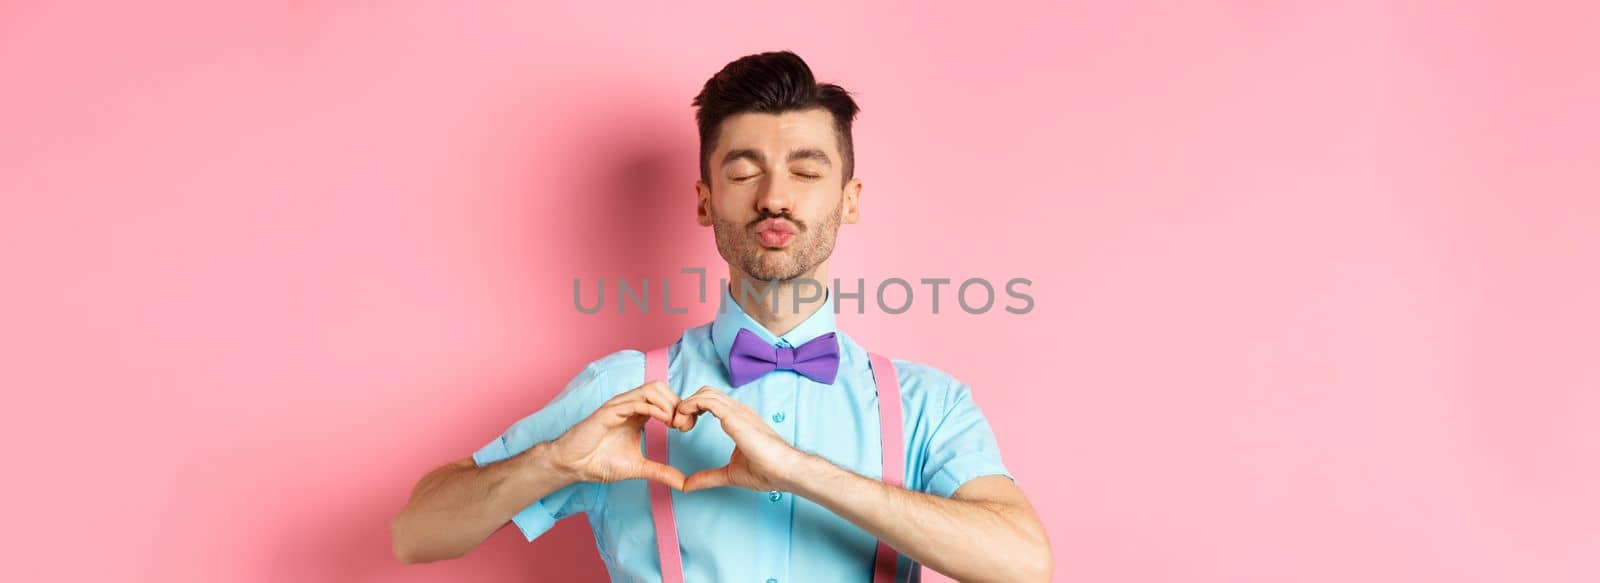 Romantic man in funny bow-tie waiting for kiss, close eyes and pucker lips kissing, showing heart gesture, being in love on Valentines day, standing over pink background.